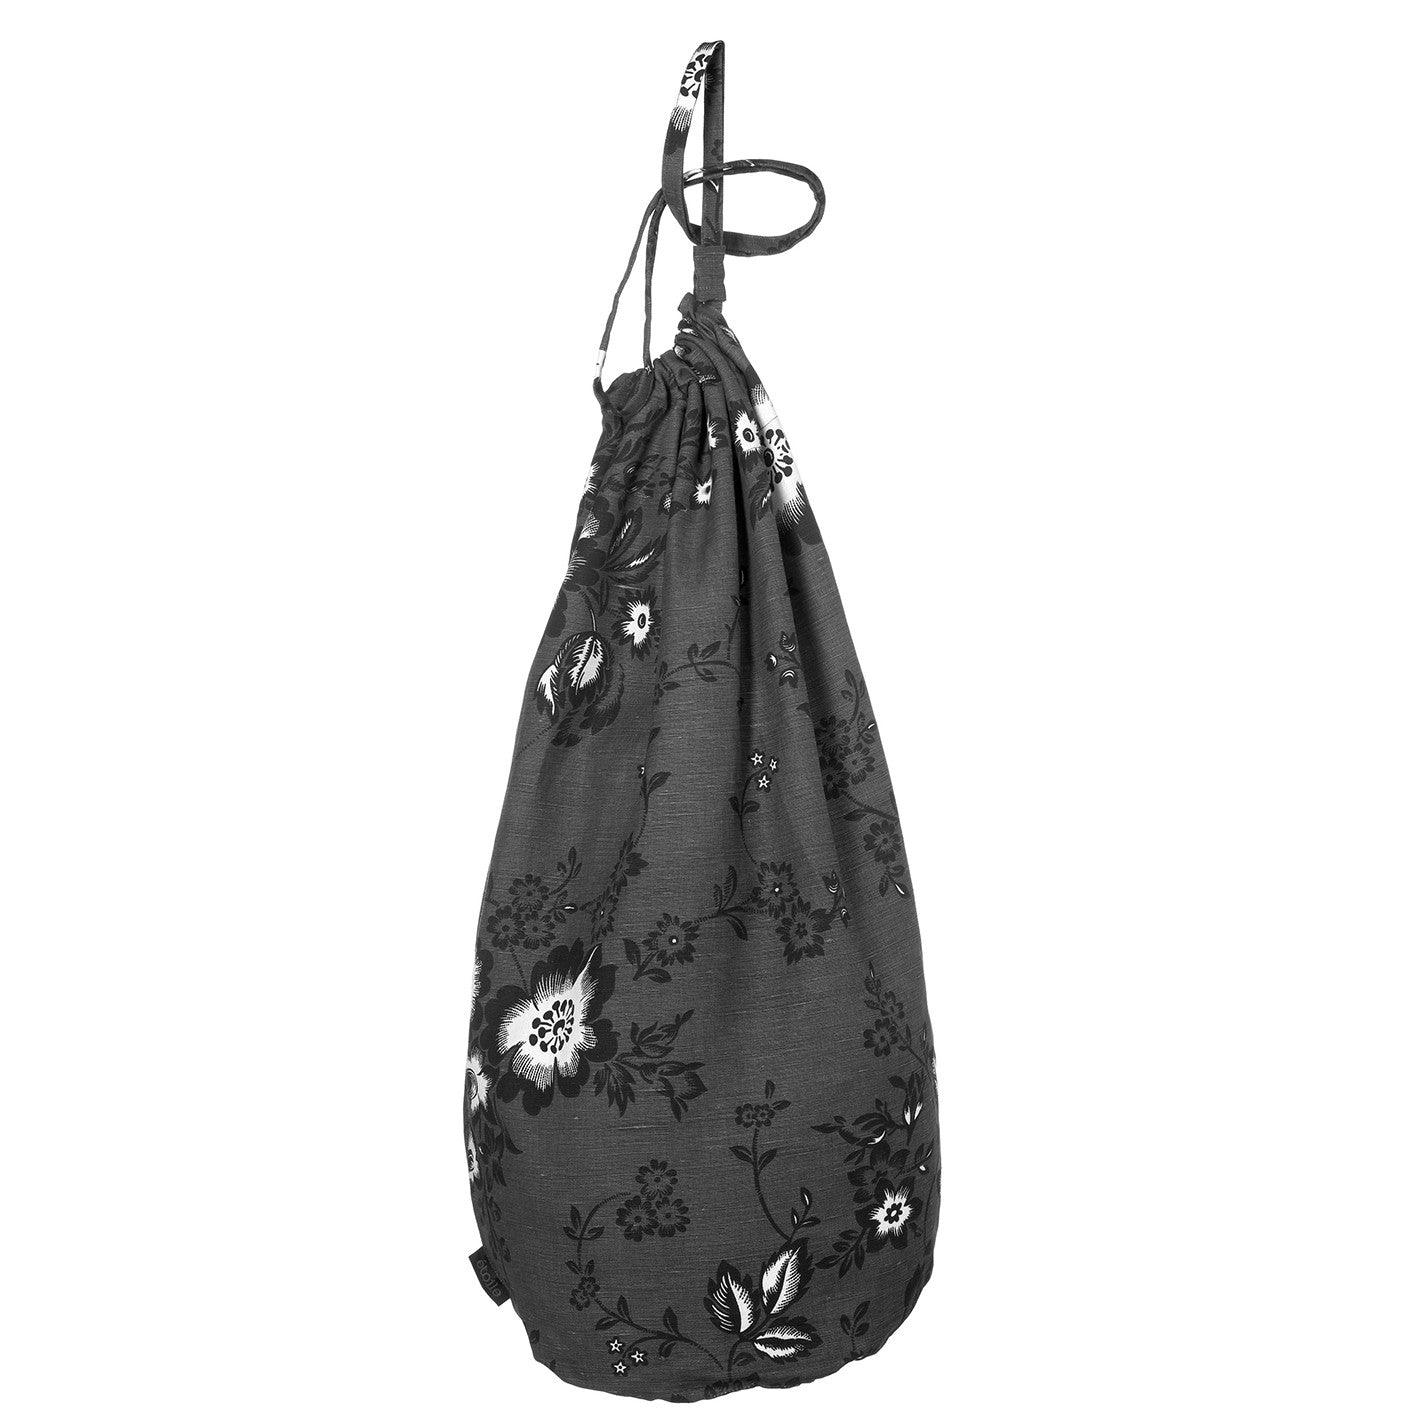 Miles Floral Linen Laundry & Storage Bag in Charcoal Grey